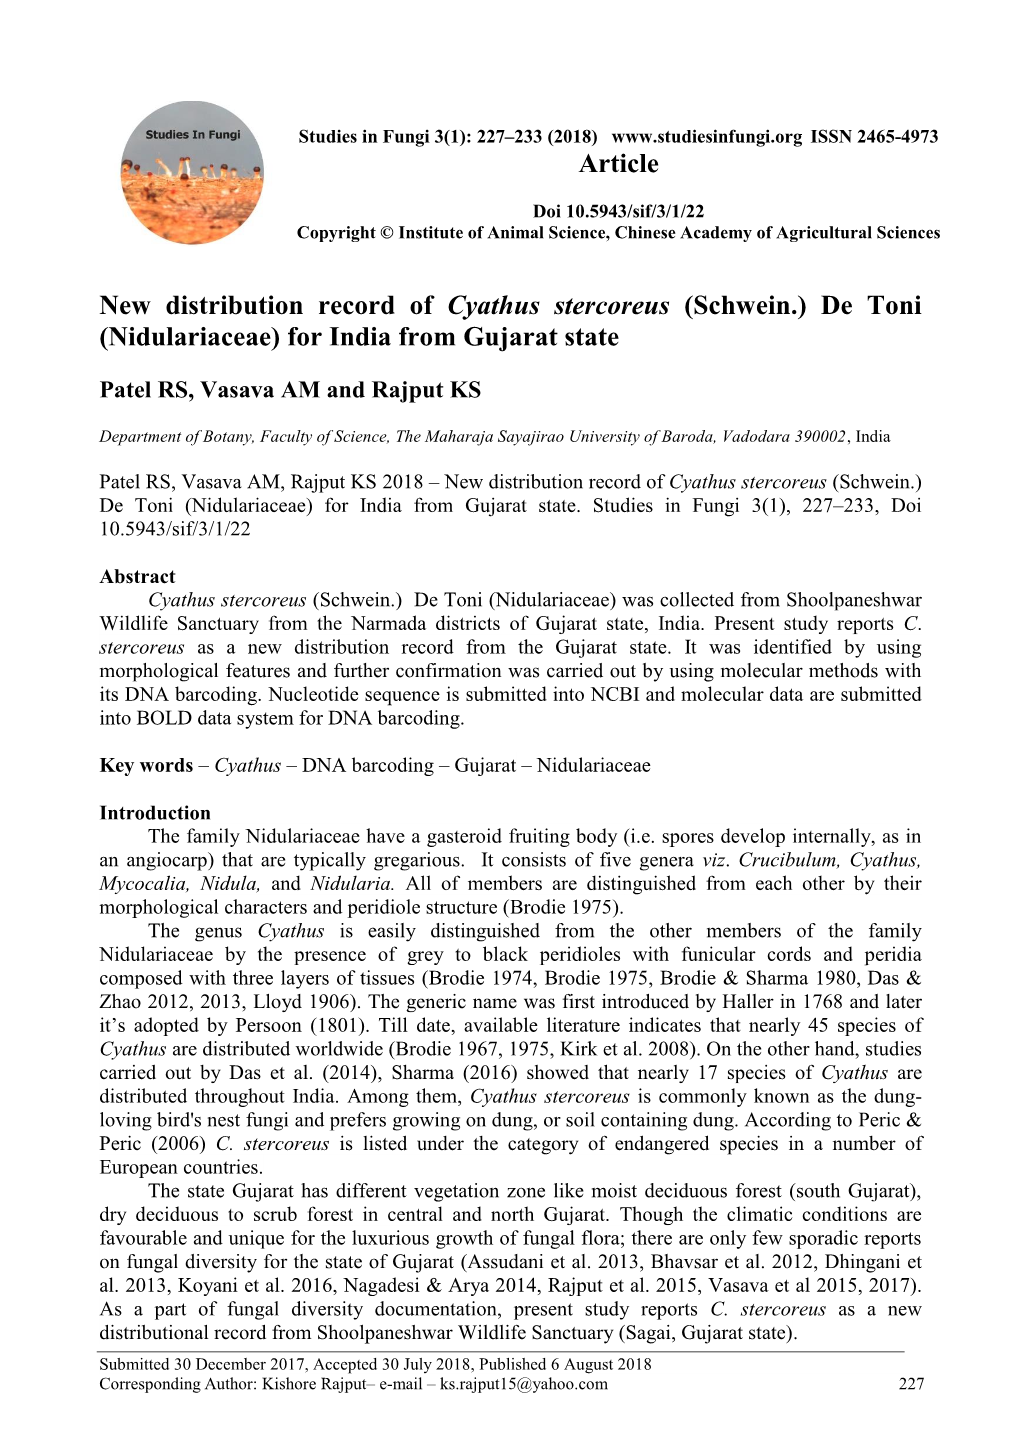 New Distribution Record of Cyathus Stercoreus (Schwein.) De Toni (Nidulariaceae) for India from Gujarat State Article